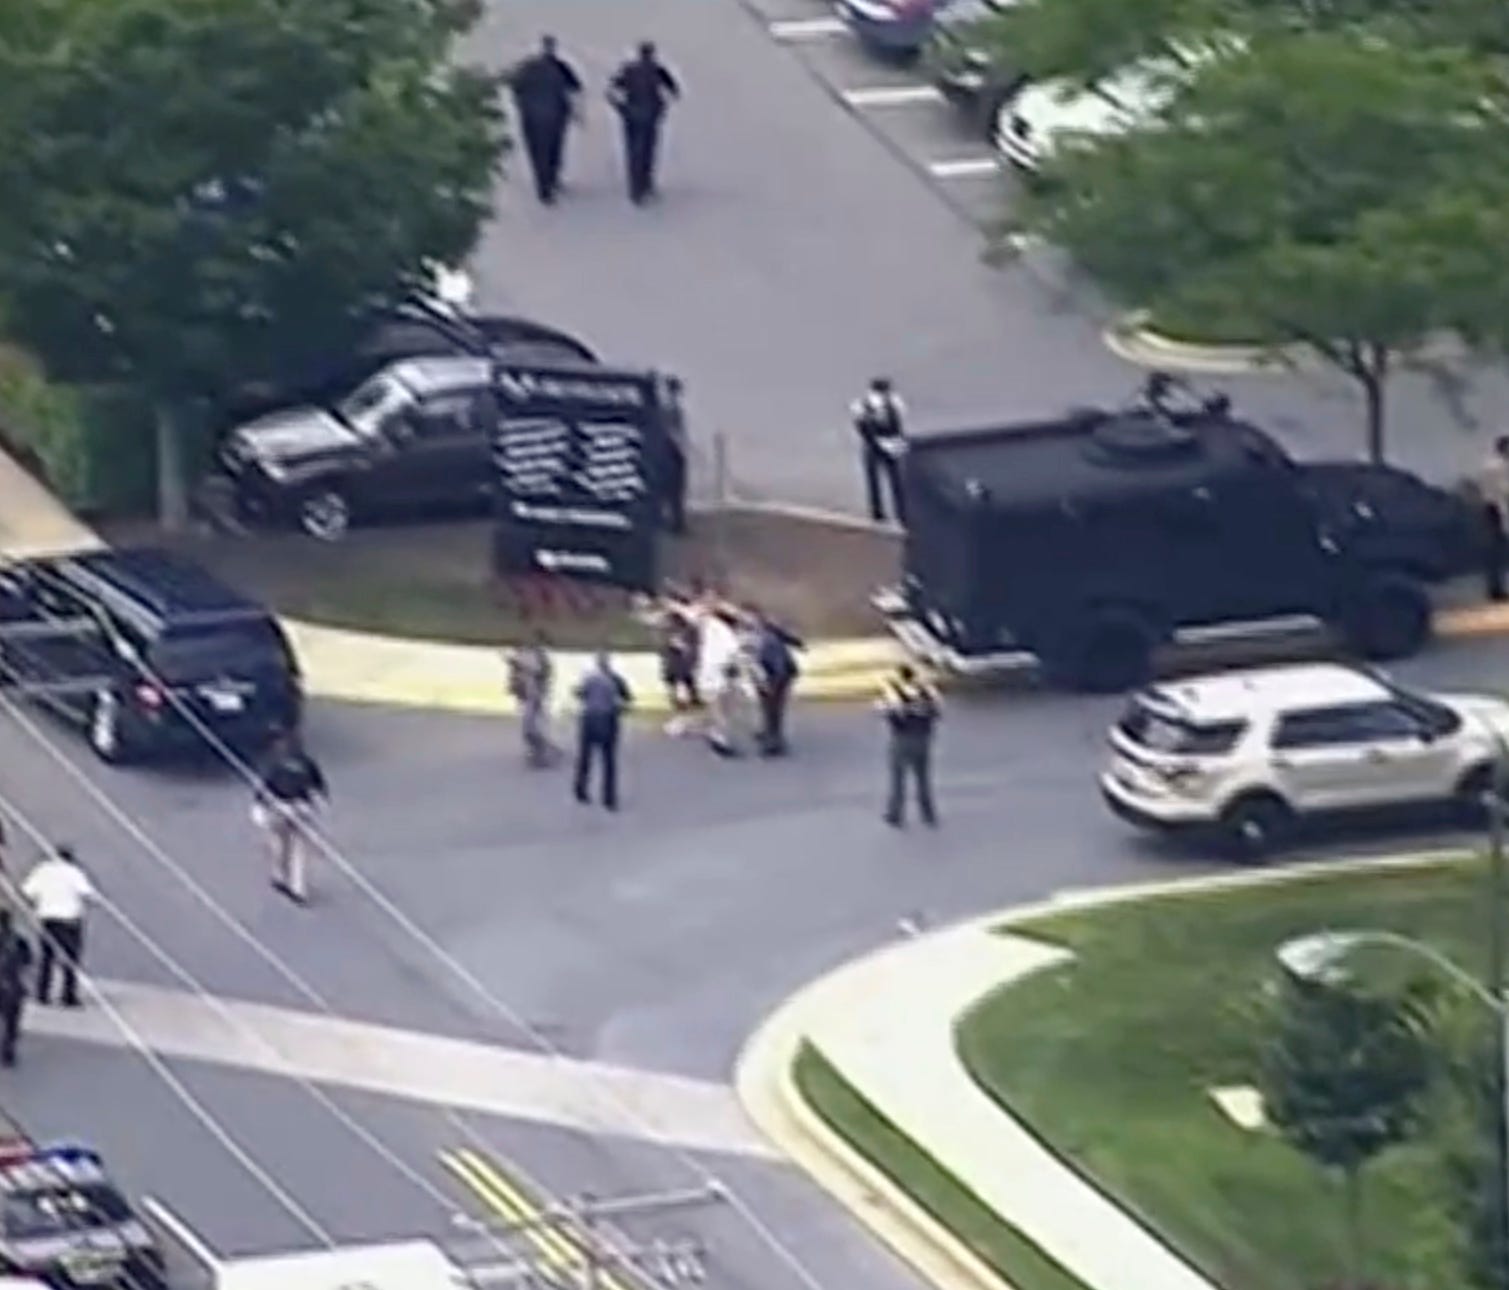 In this frame from video, people leave the Capital Gazette newspaper after multiple people have been shot on June 28, 2018, in Annapolis, Md.